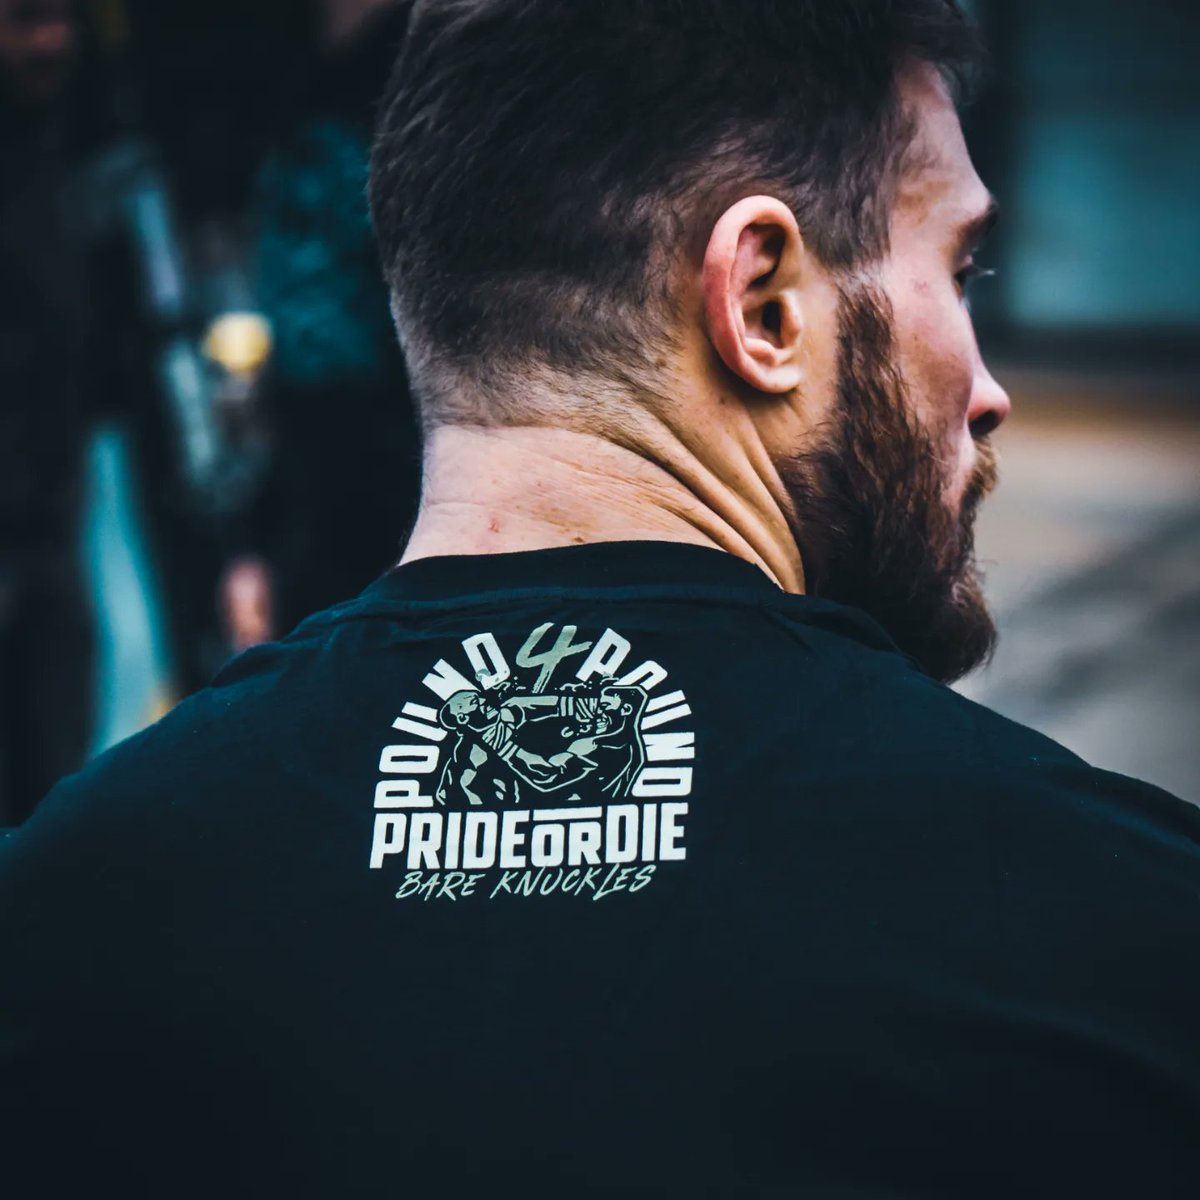 🆕️ Tshirt PRiDEorDiE 'BARE KNUCKLES'
👊 Disponible dès maintenant !
📦 Expédition sous 48h.
💥 Become a #PRiDEorDiE members & join the #PoDfamily ! 
-----------------
🛒 prideordie.com
🌍 Worldwide delivery